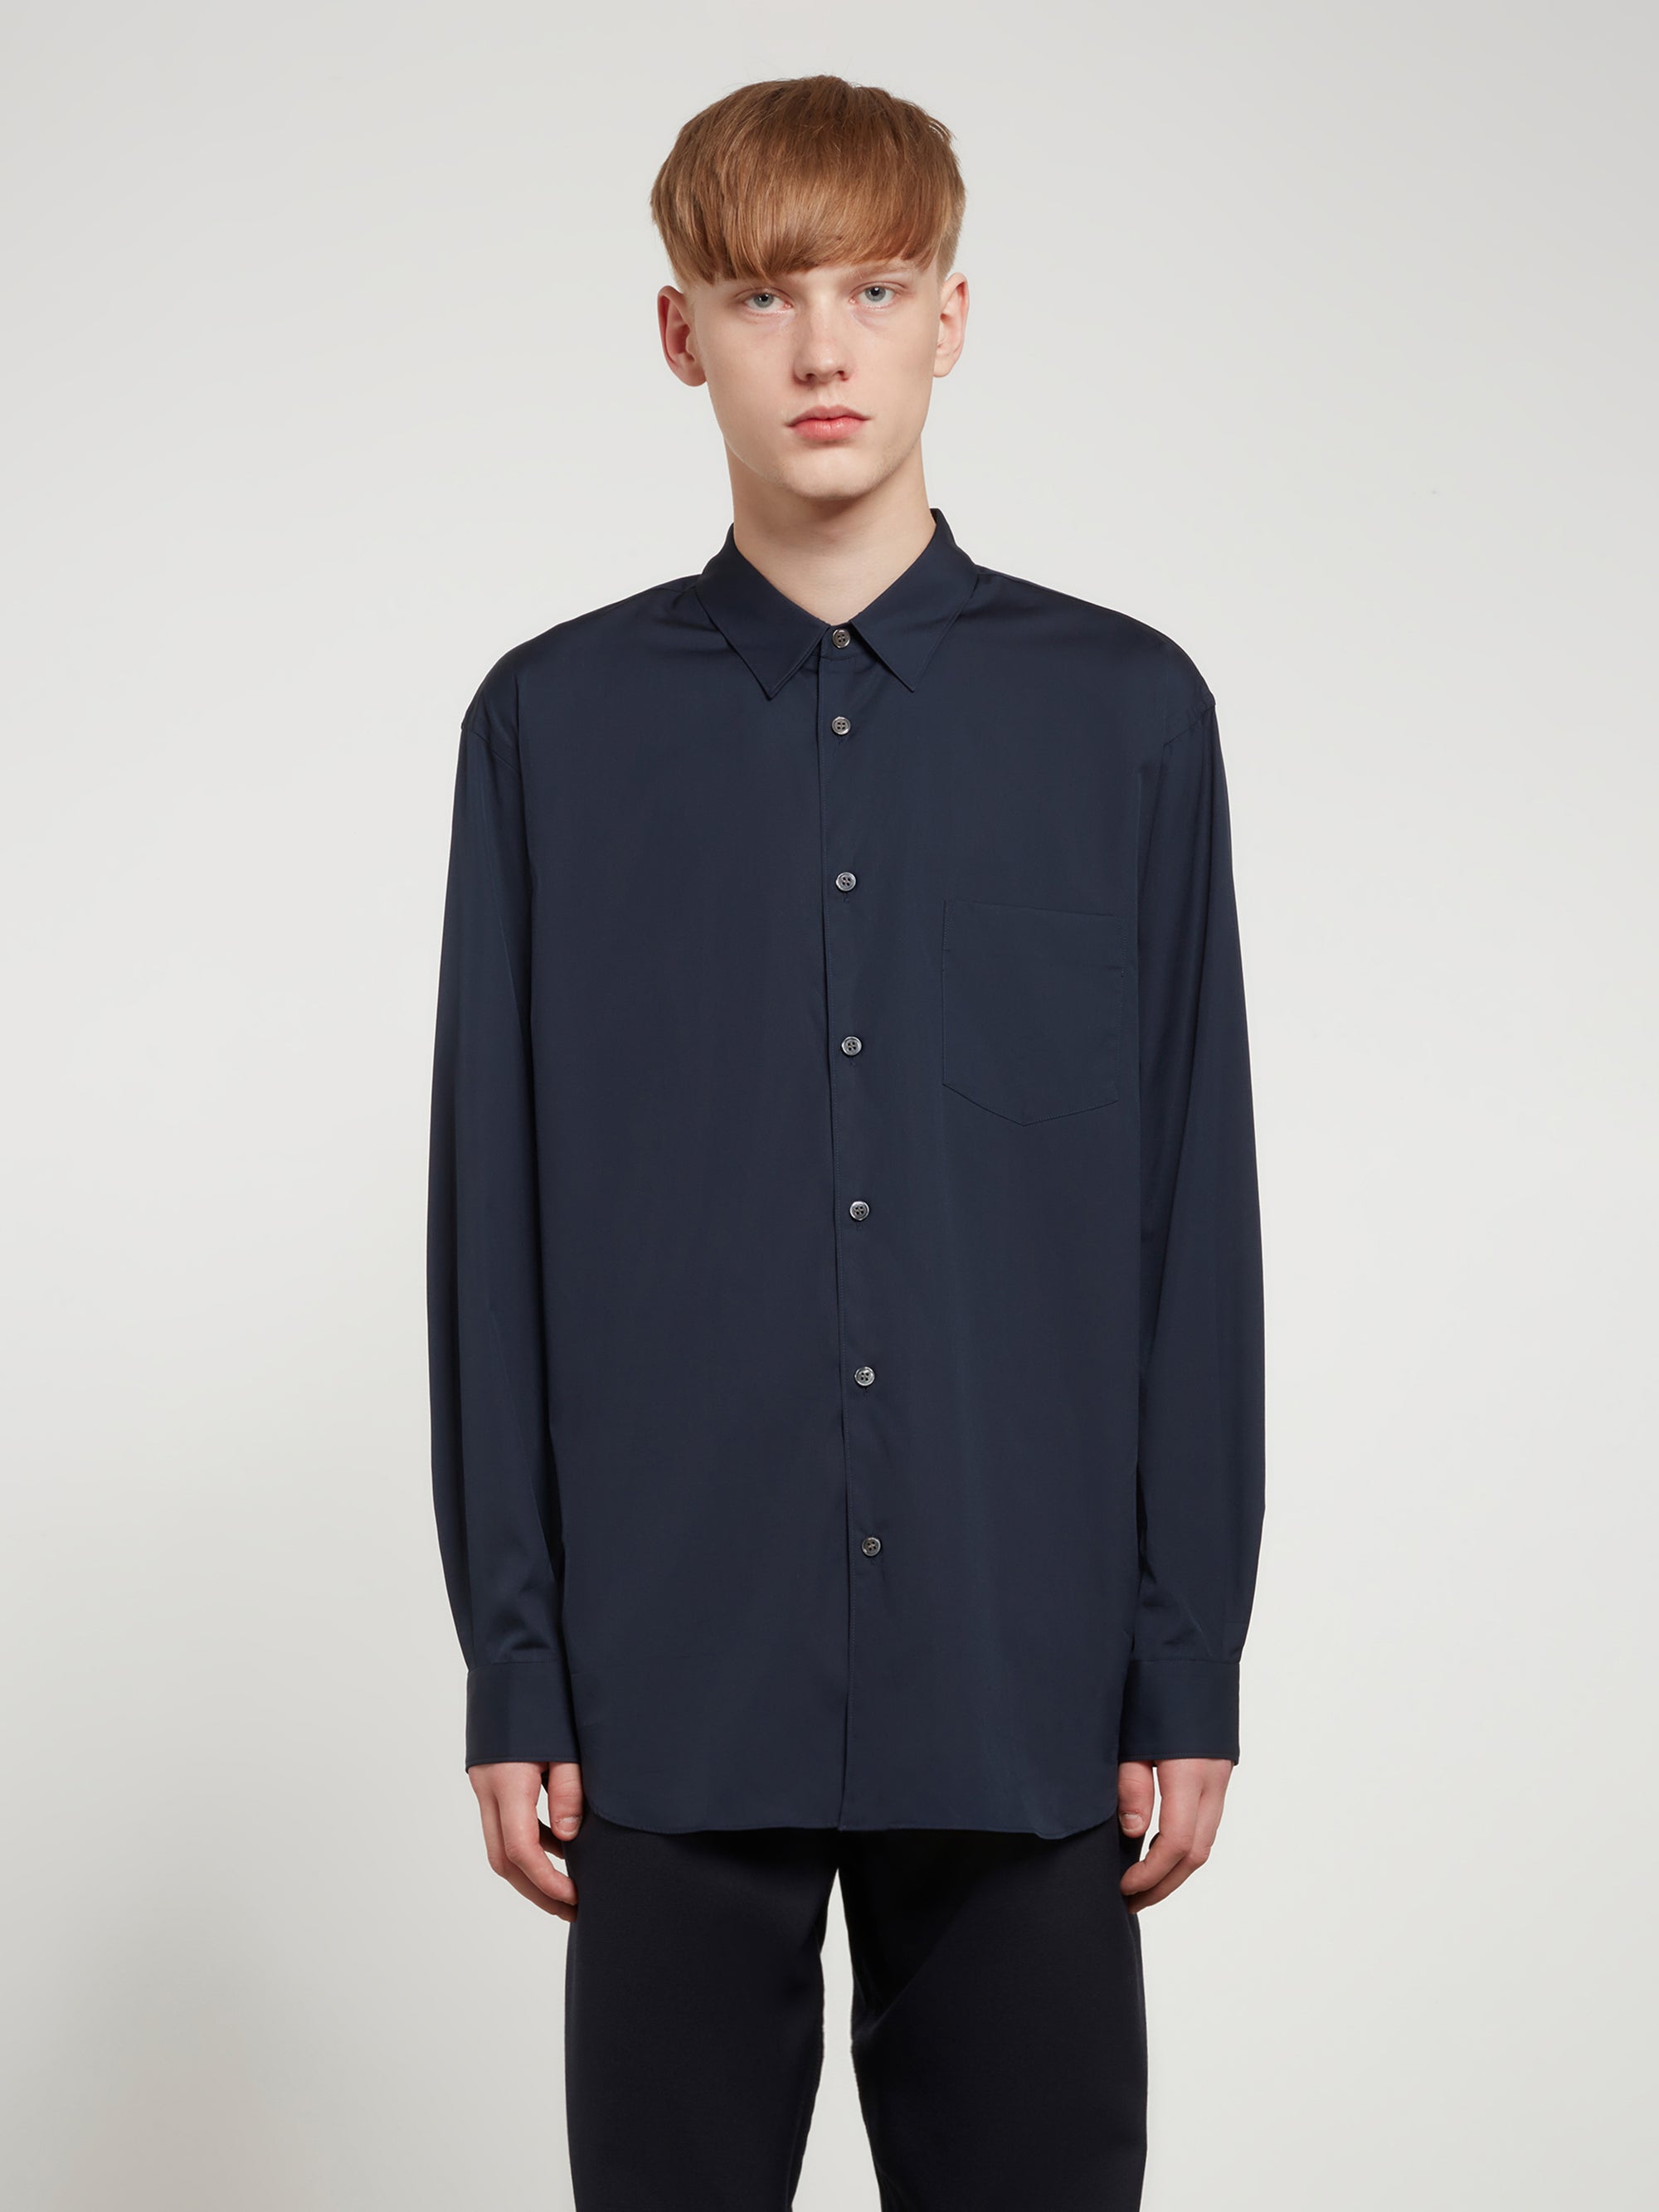 CDG Shirt Forever - Classic Fit Woven Cotton Shirt - (Navy) view 2